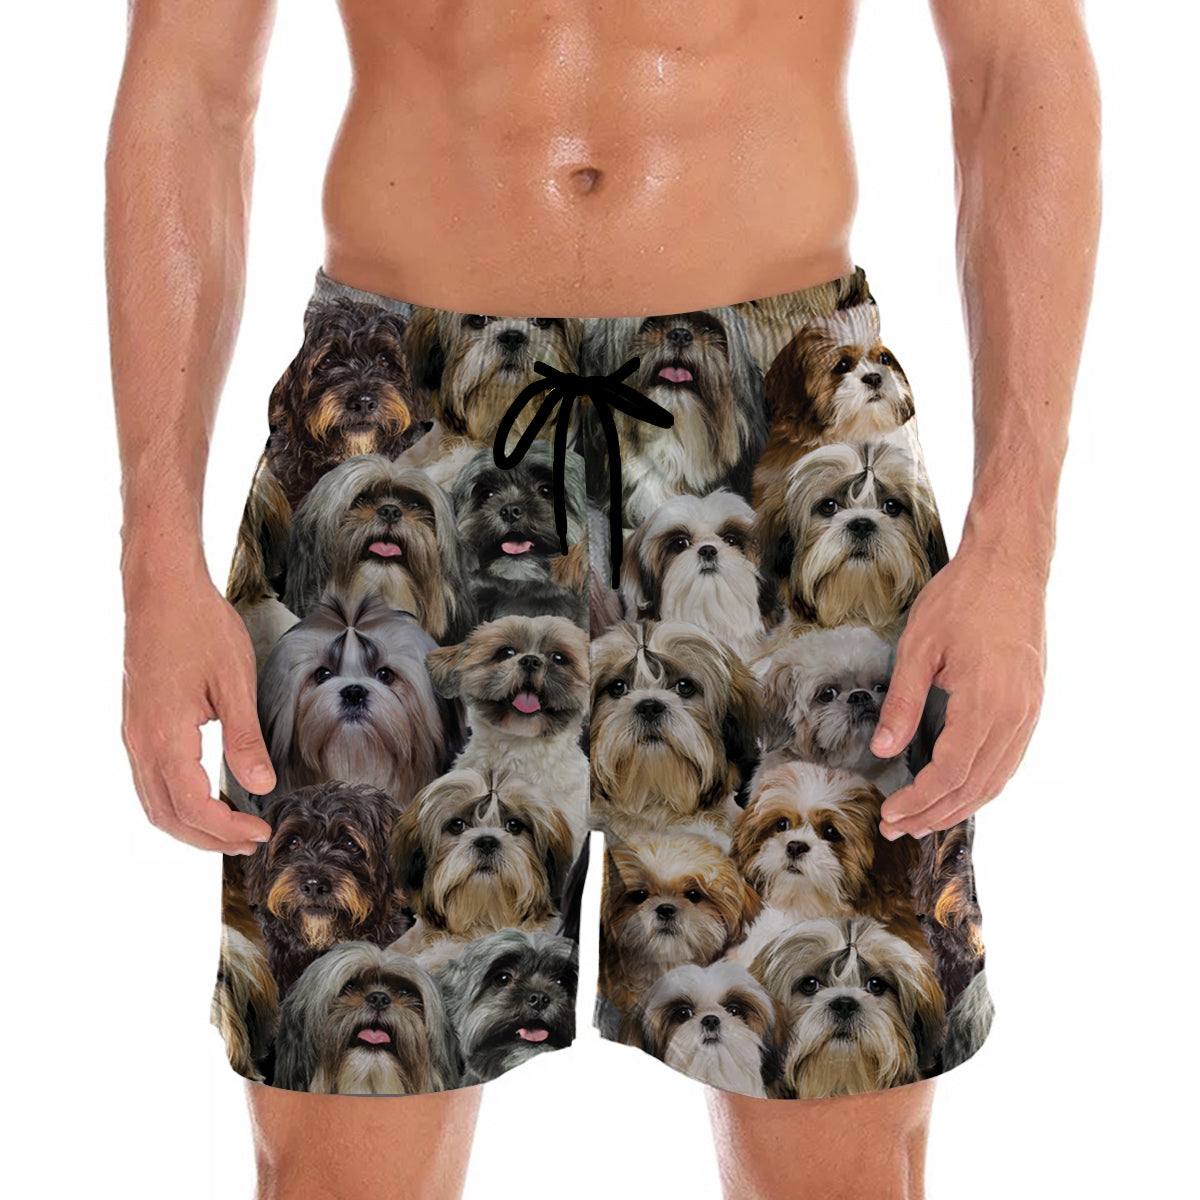 You Will Have A Bunch Of Shih Tzus - Shorts V1